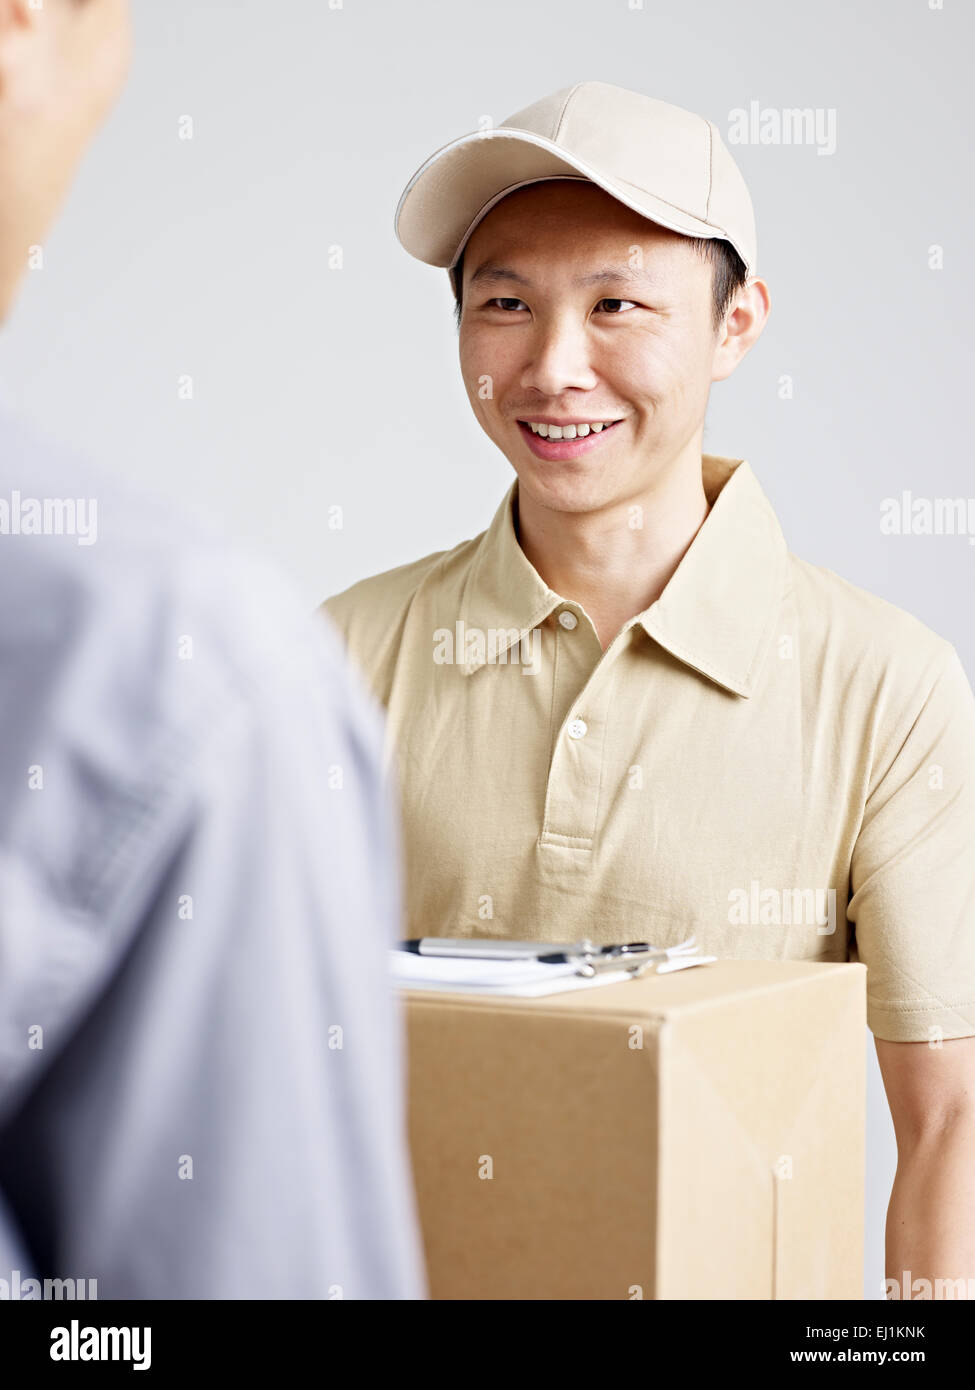 delivery man delivering a packag. Stock Photo